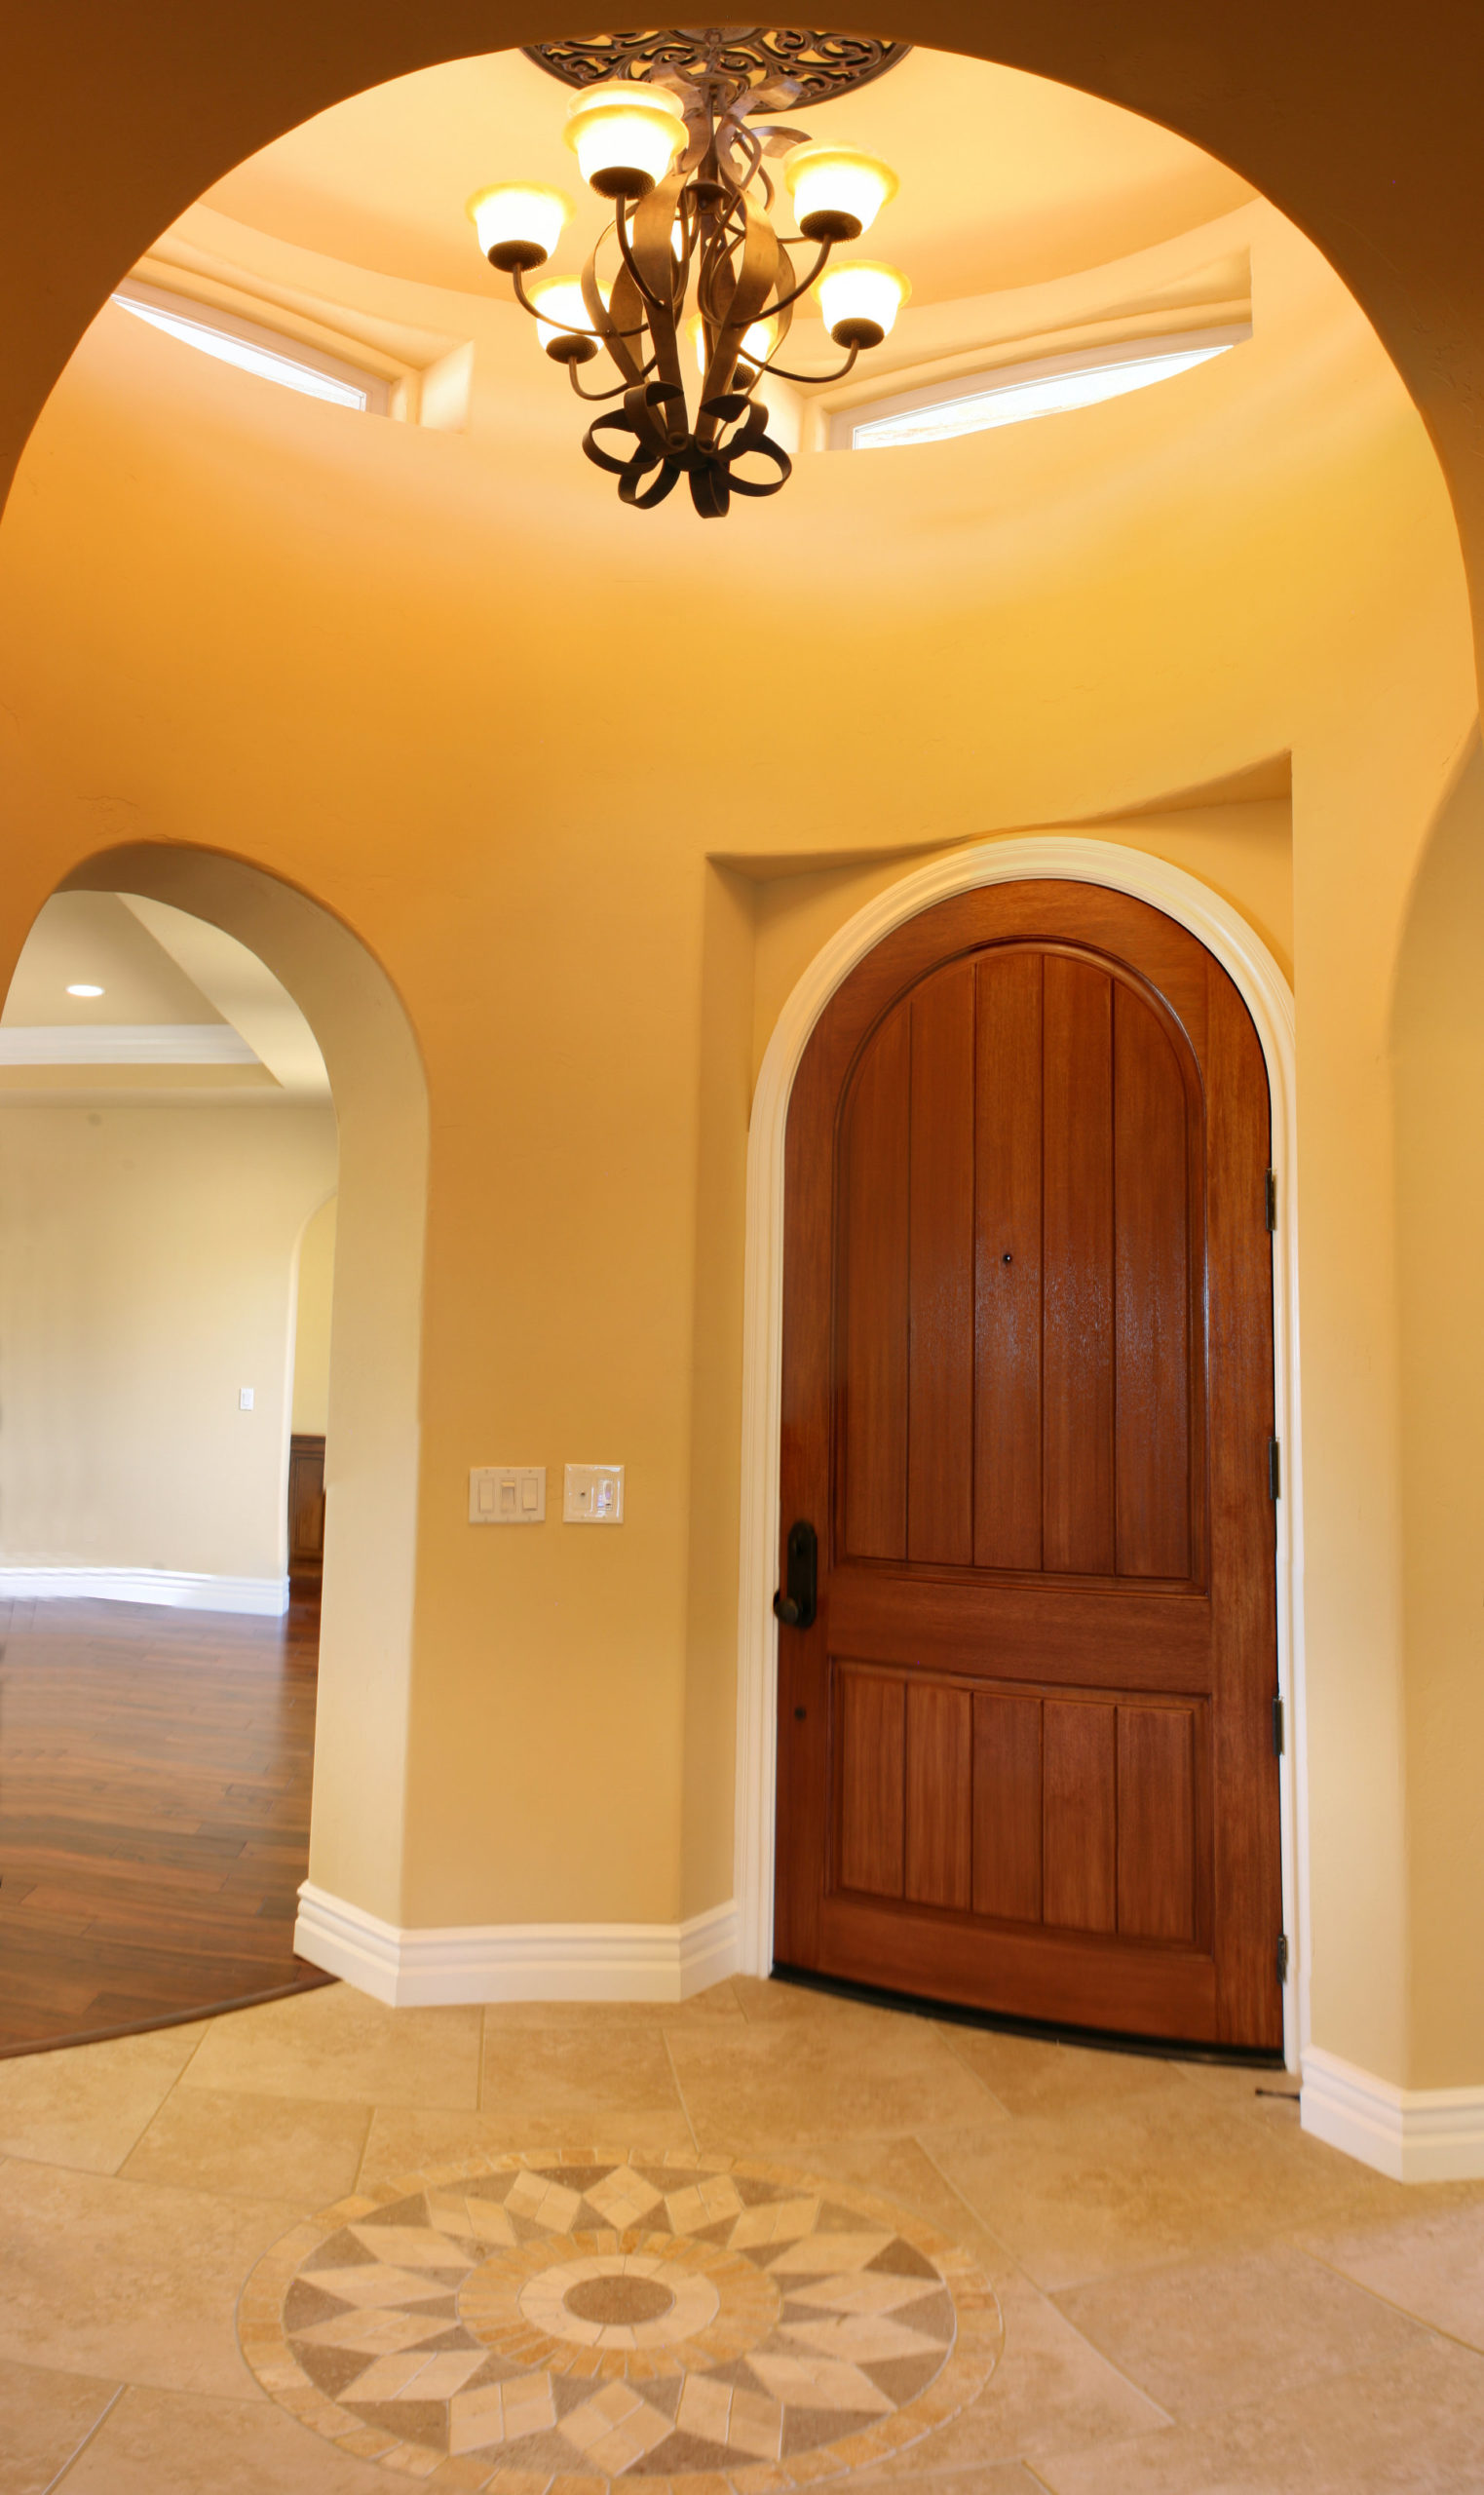 Entry area of home showing arched doorways and inlay flooring